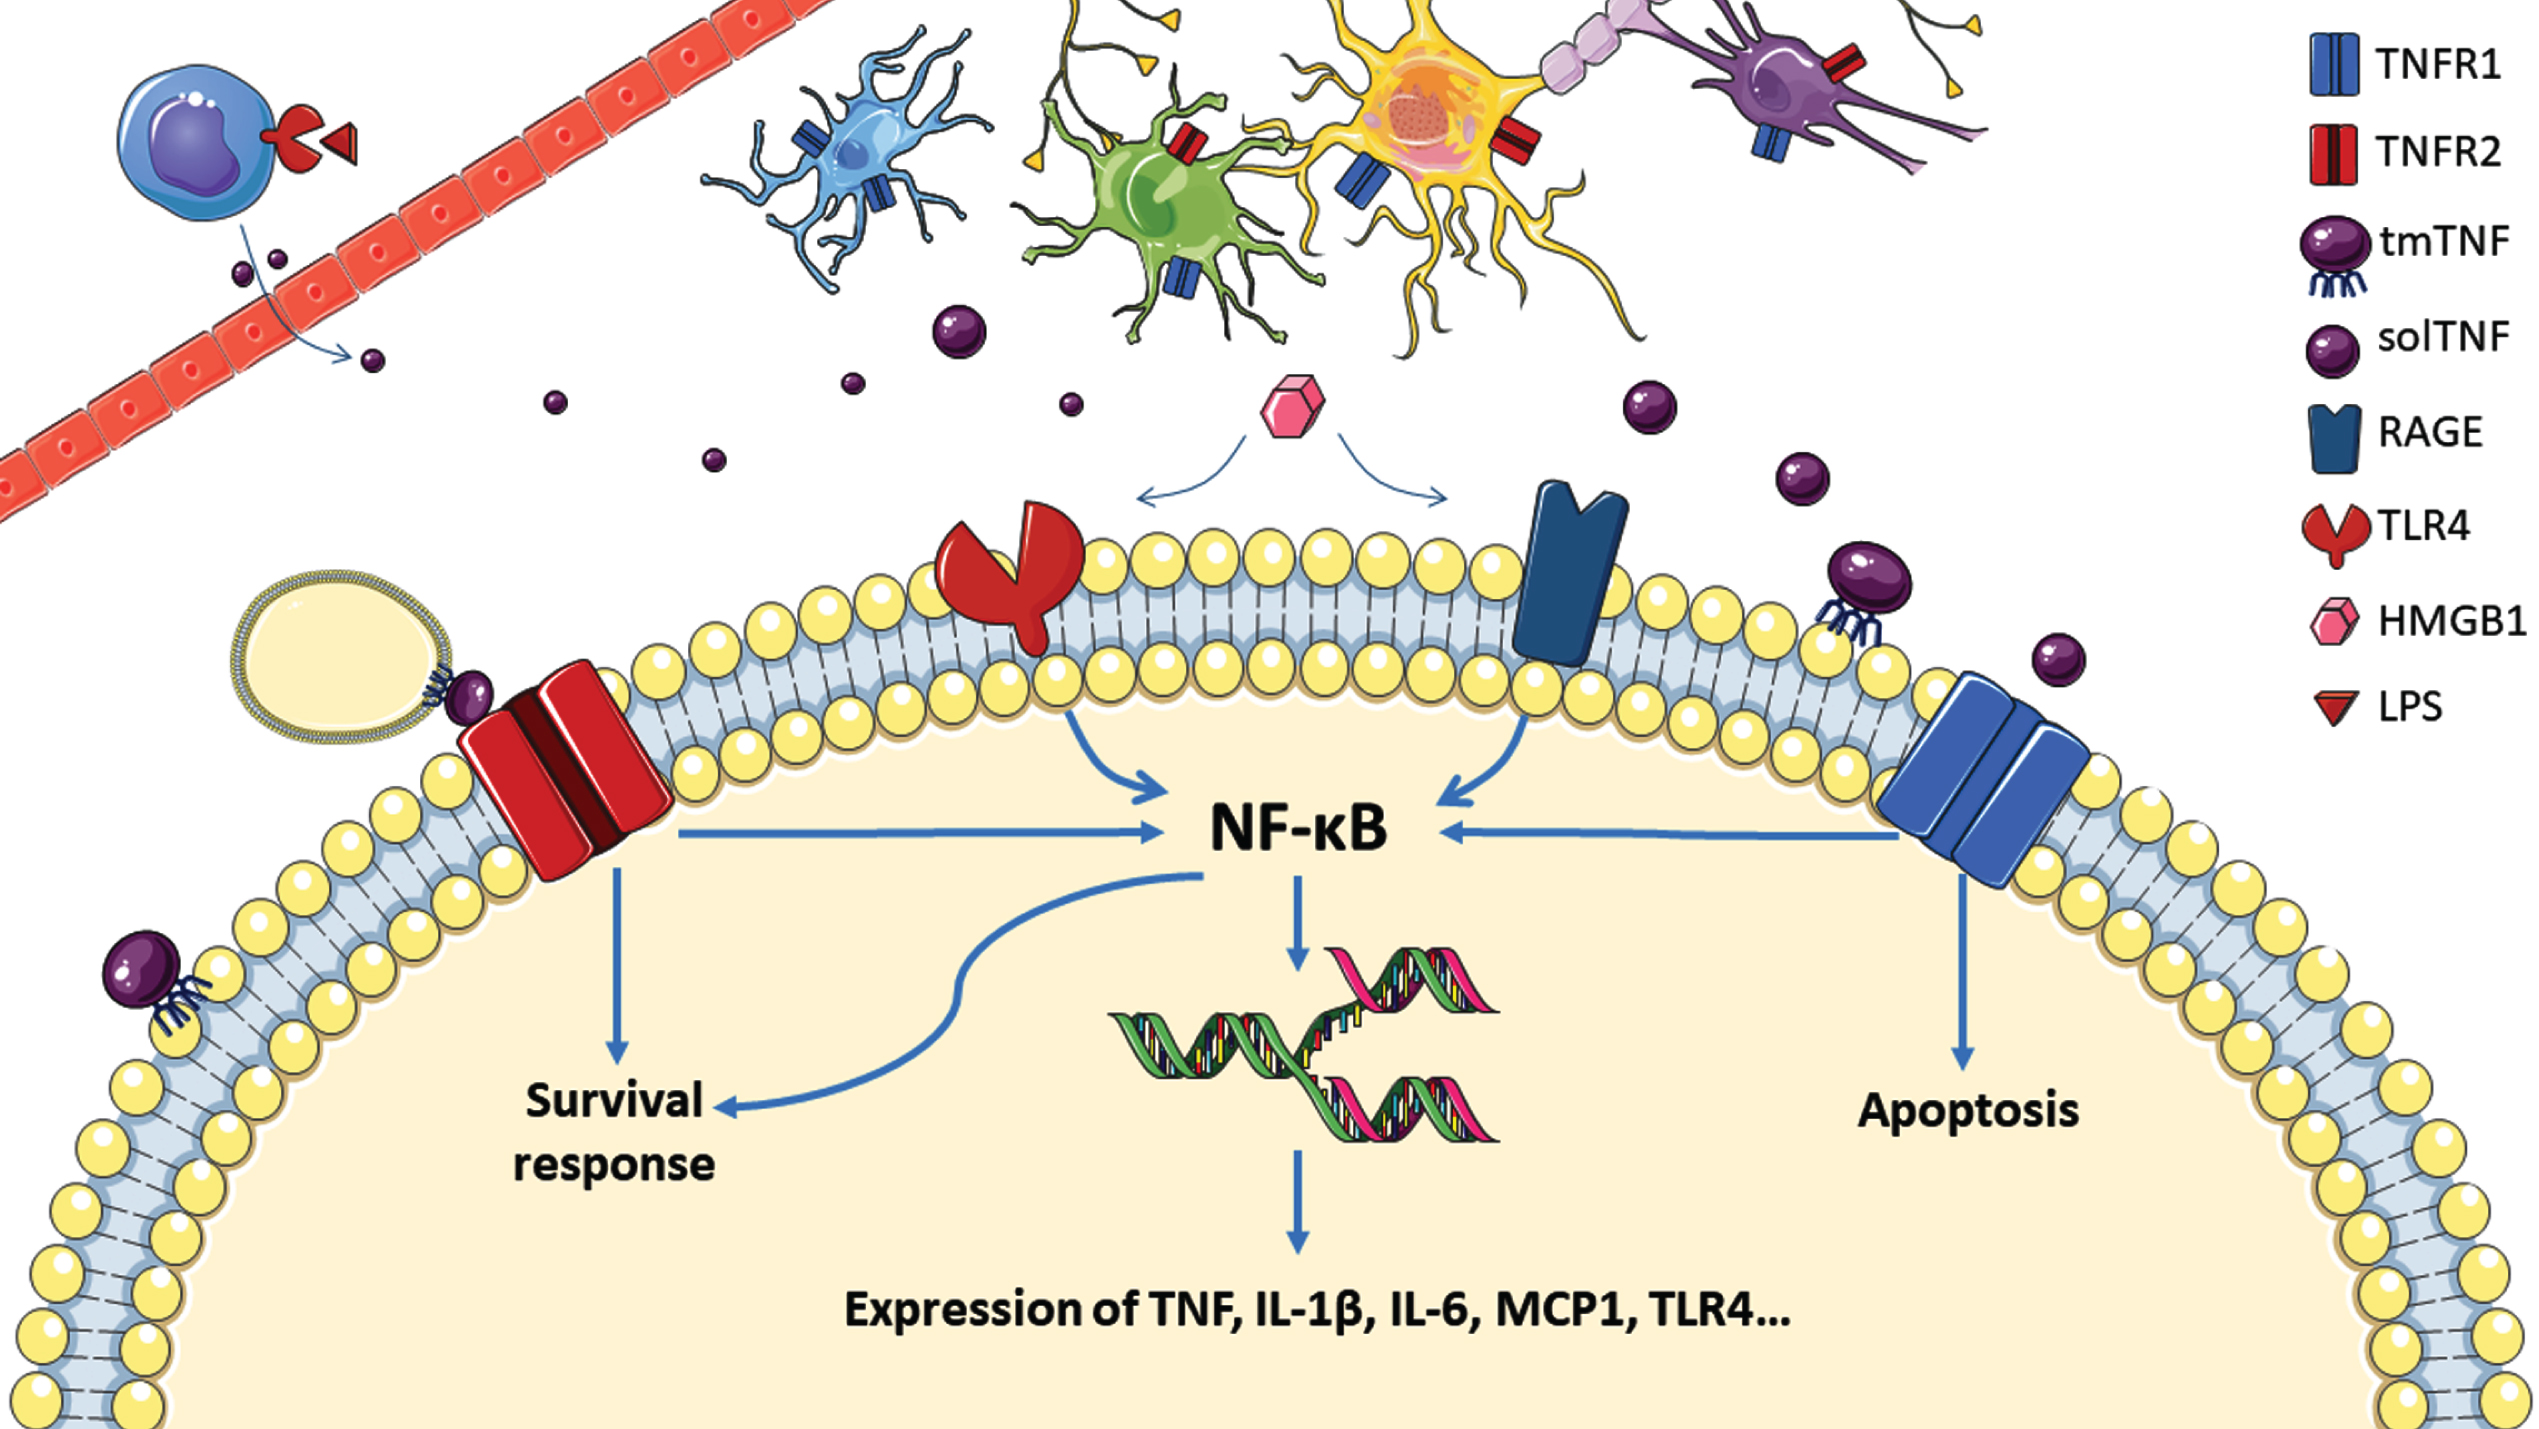 Overview of TNF signalling after alcohol consumption within a neuron. Peripheral immune cells release TNF following binding of lipopolysaccharide (LPS) through toll like receptor 4 (TLR4), which crosses the blood brain barrier (top left) to stimulate TNFR1 signalling and NF-κB translocation to the nucleus for transcription of TNF and other cytokines. High motility group box 1 (HMGB-1) also activates NF-κB through receptor for advanced glycation end products (RAGE) and toll like receptor 4 (TLR4). Microglia (blue), astrocytes (green), neurons (yellow) and oligodendrocytes (purple) are represented here with their respective TNF receptors.